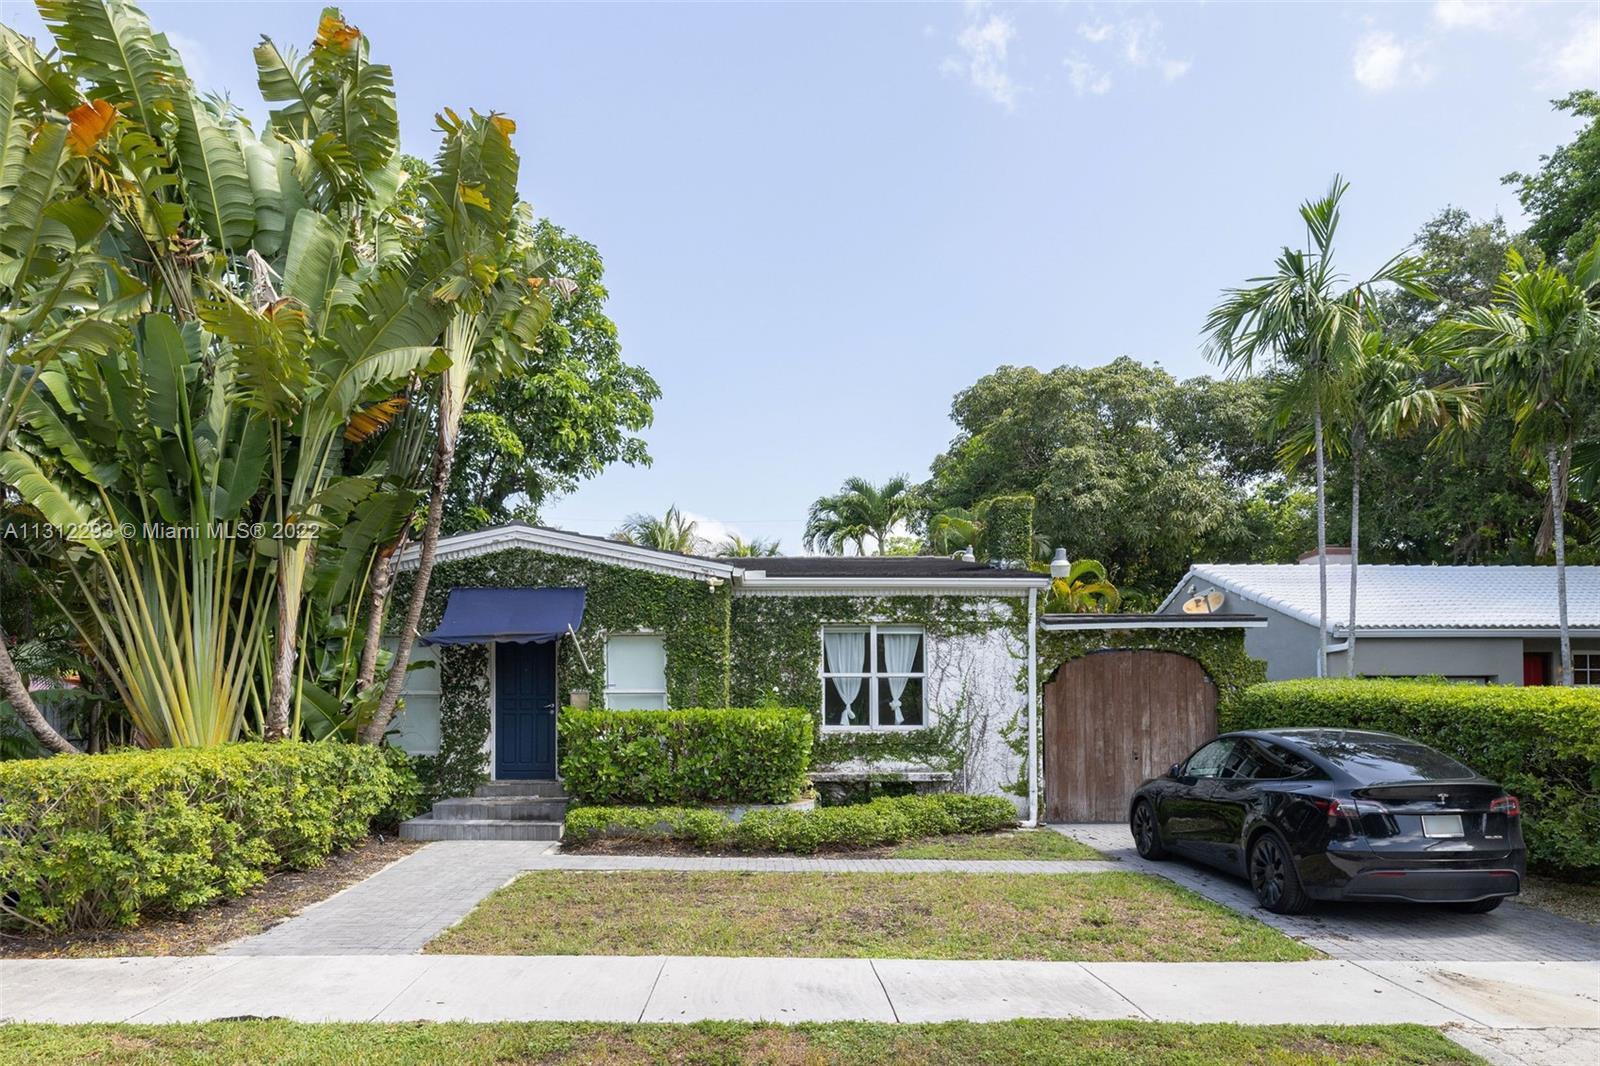 Ideal location, steps from the Design District, completely renovated pool house. All the character a